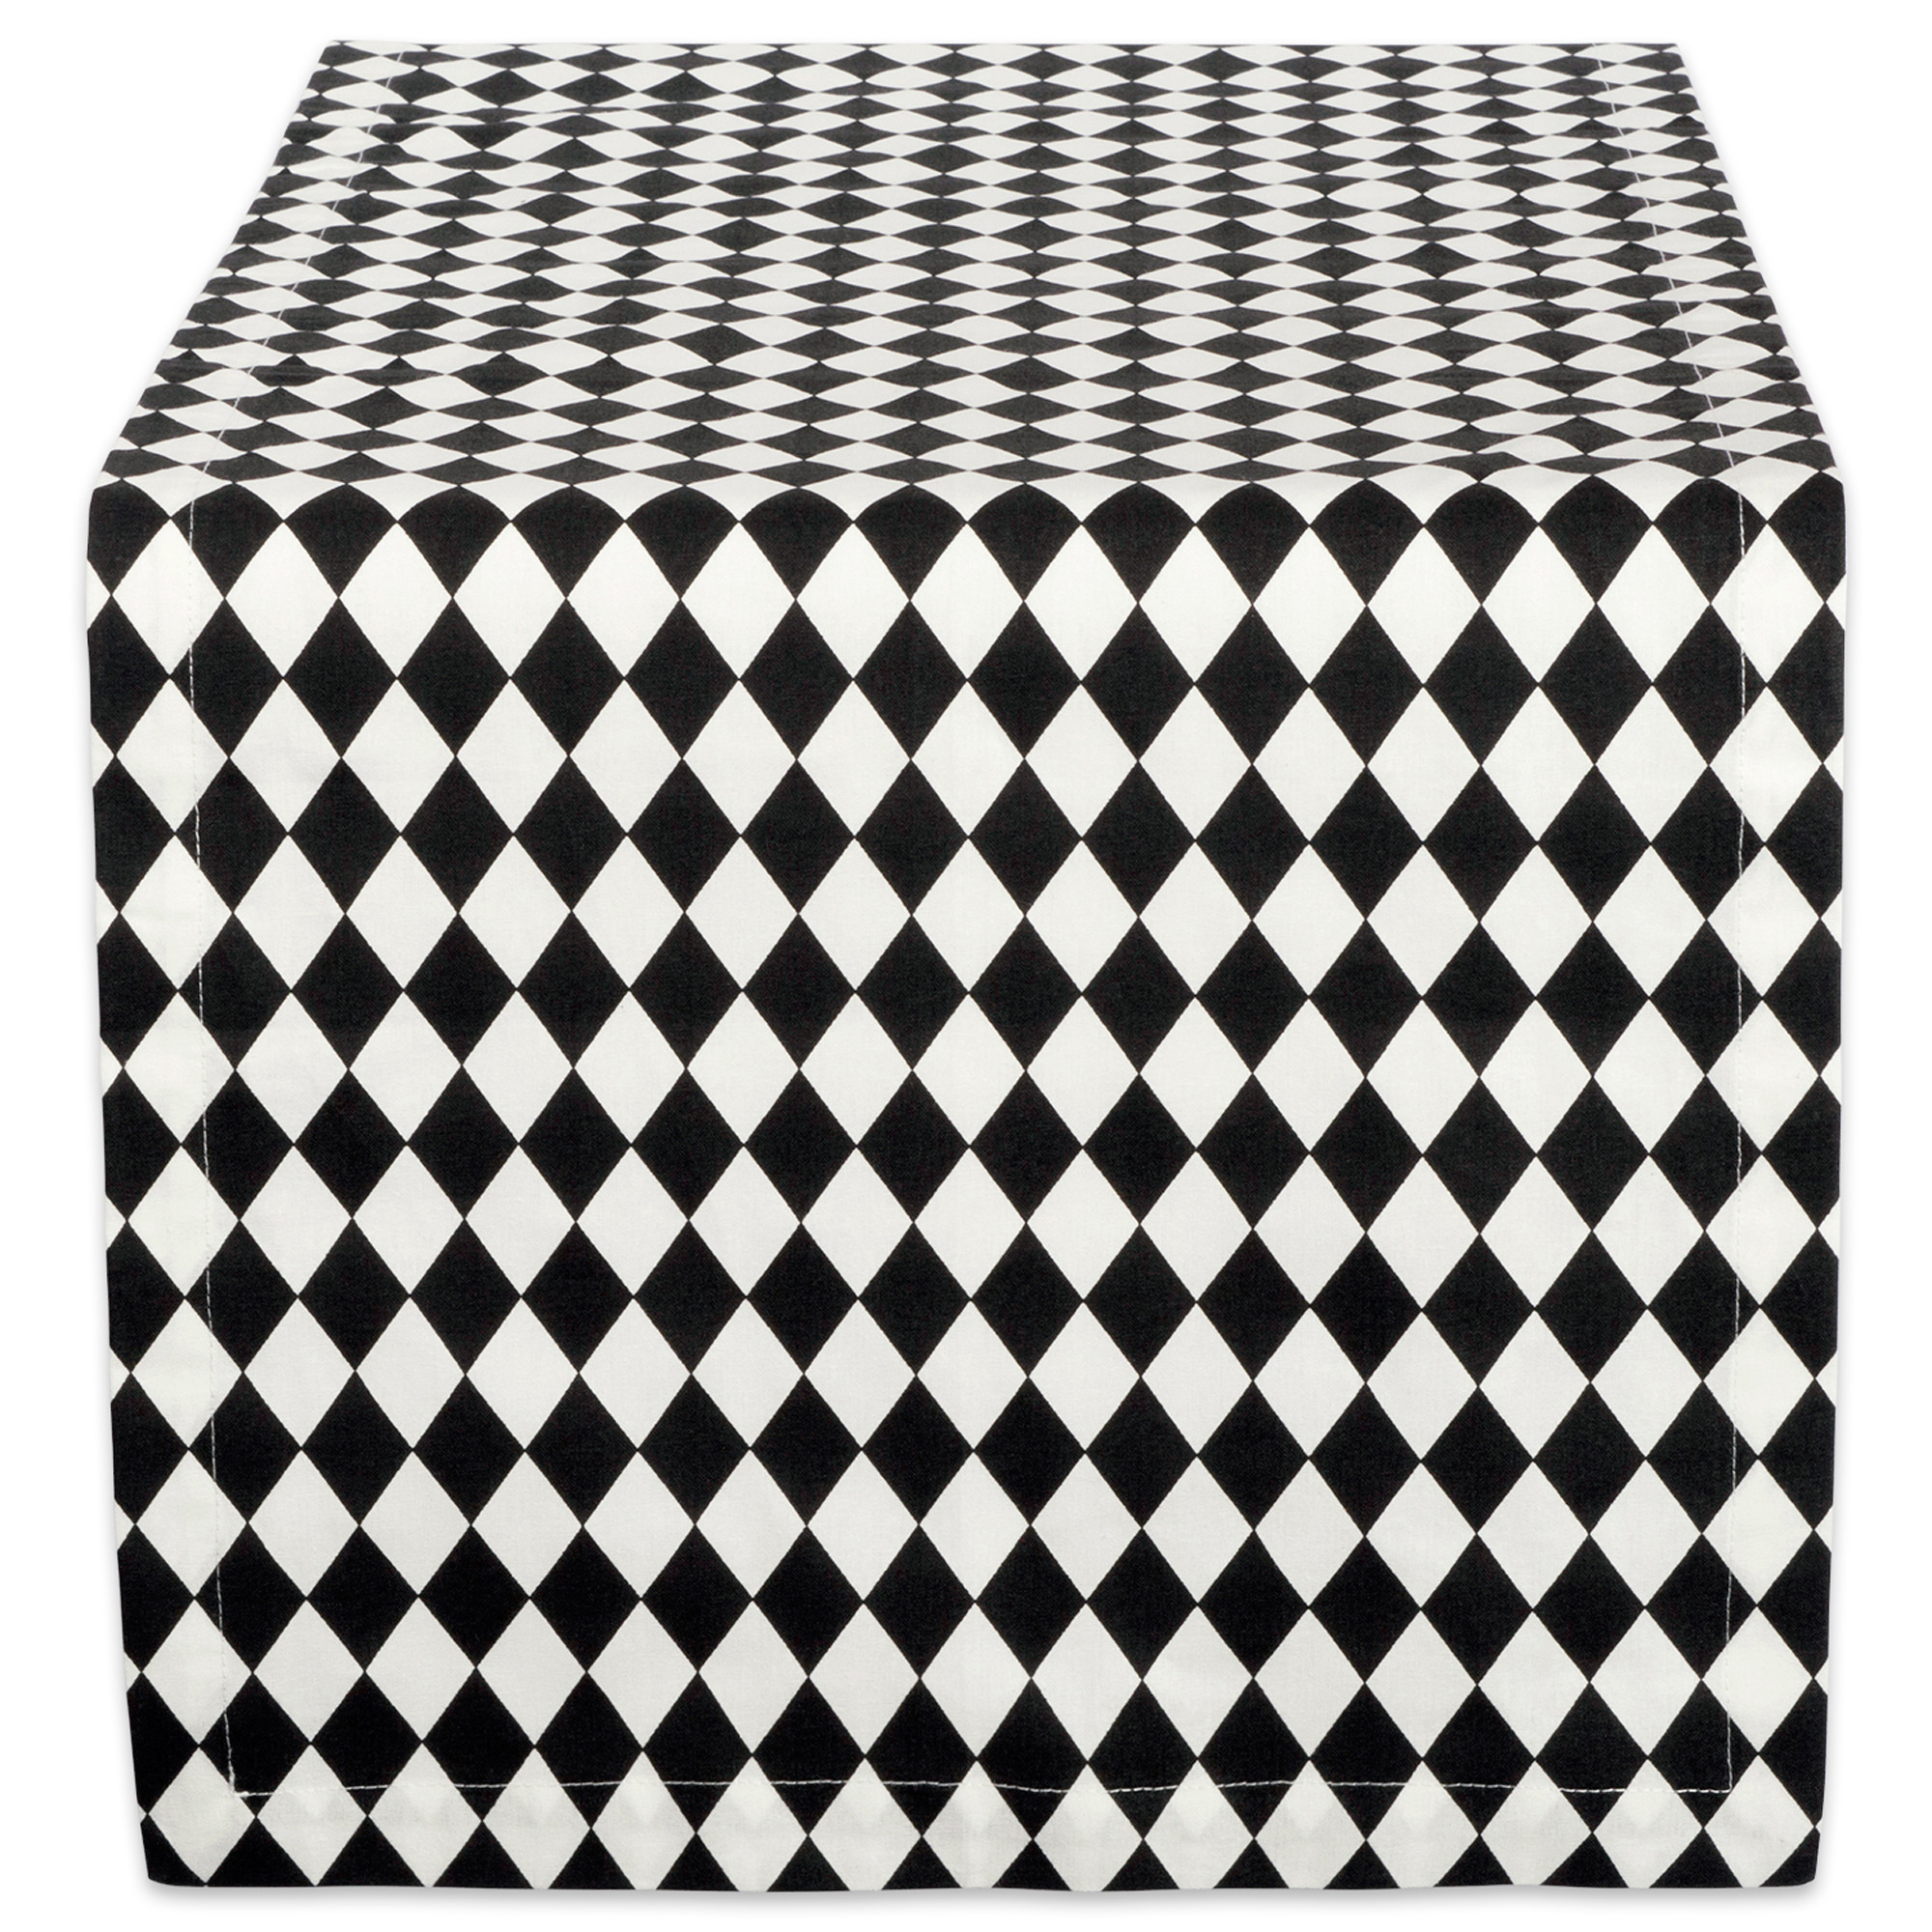 CC Home Furnishings 108" x 14" Black and White Harelquin Print Table Runner